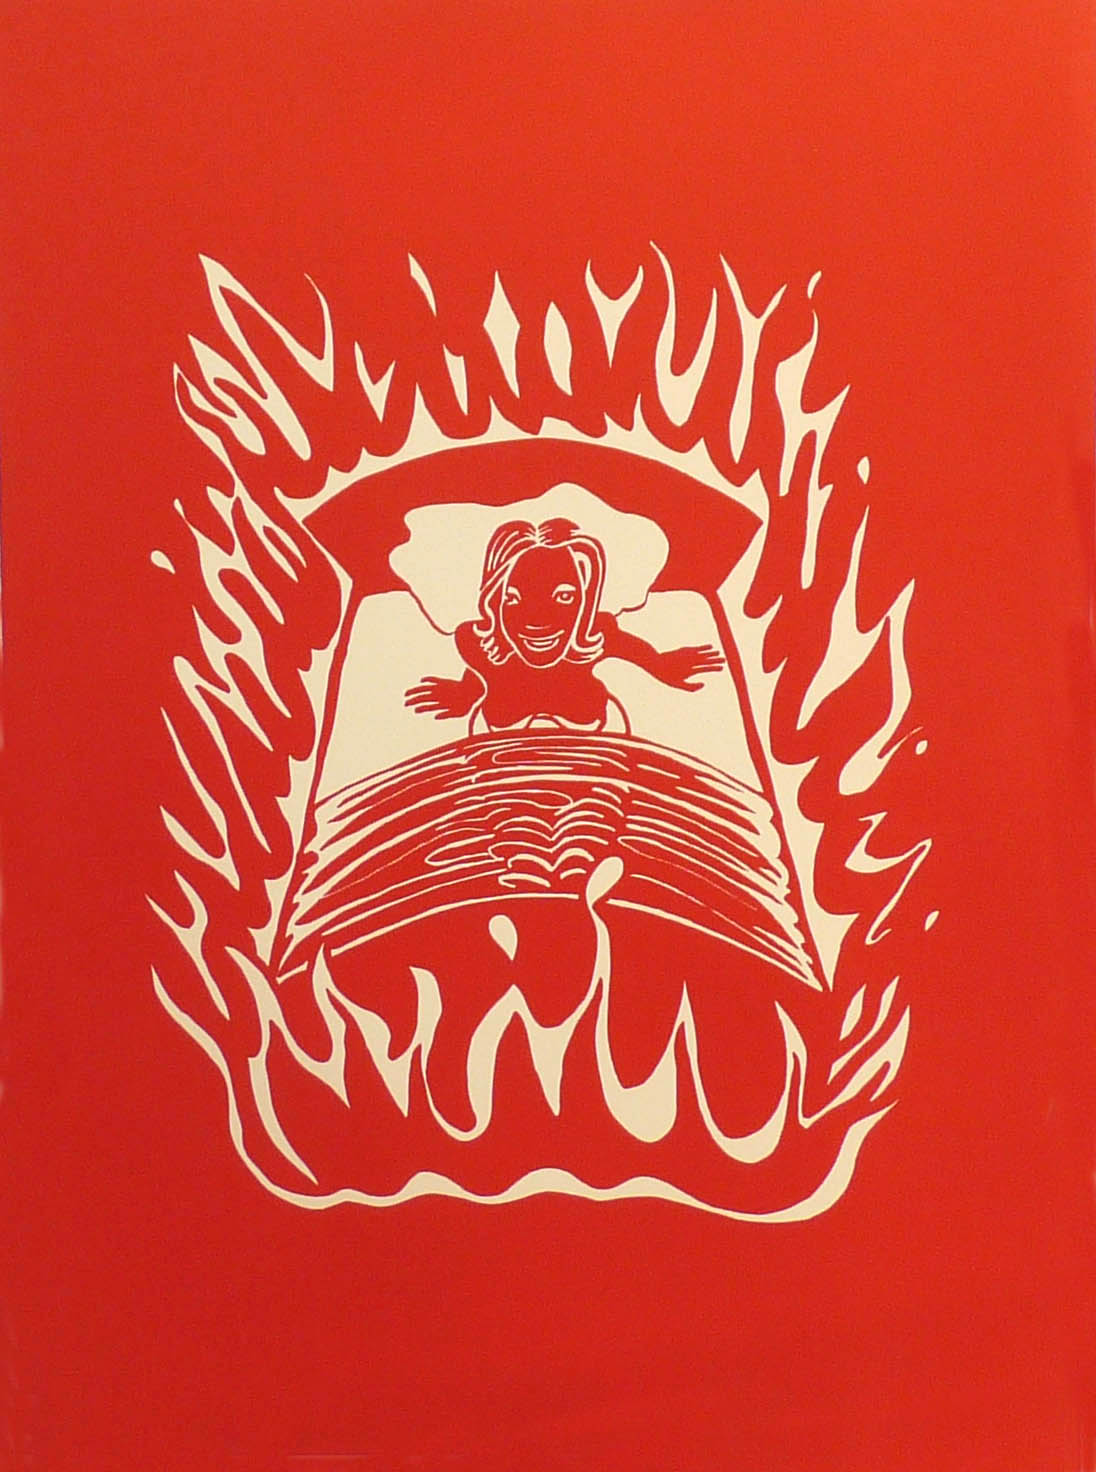 Willie Cole's Burning Bed is available on Artspace for $800 or as low as $71/month